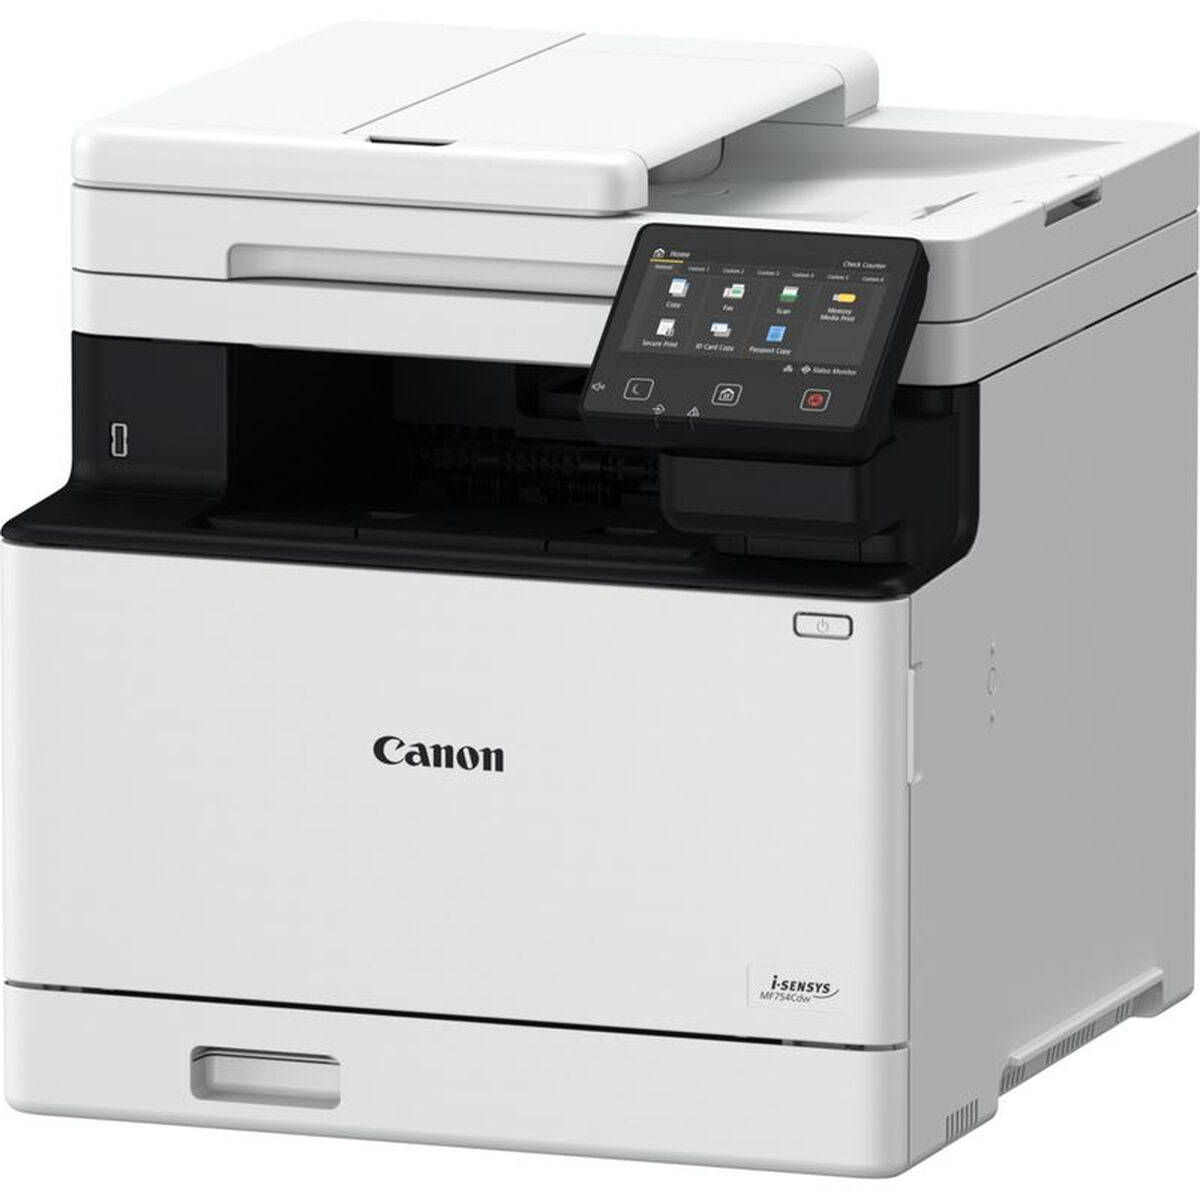 Multifunction Printer Canon I-SENSYS MF754CDW MFP, Canon, Computing, Printers and accessories, multifunction-printer-canon-i-sensys-mf754cdw-mfp, Brand_Canon, category-reference-2609, category-reference-2642, category-reference-2645, category-reference-t-19685, category-reference-t-19911, category-reference-t-21378, computers / peripherals, Condition_NEW, office, Price_500 - 600, Teleworking, RiotNook